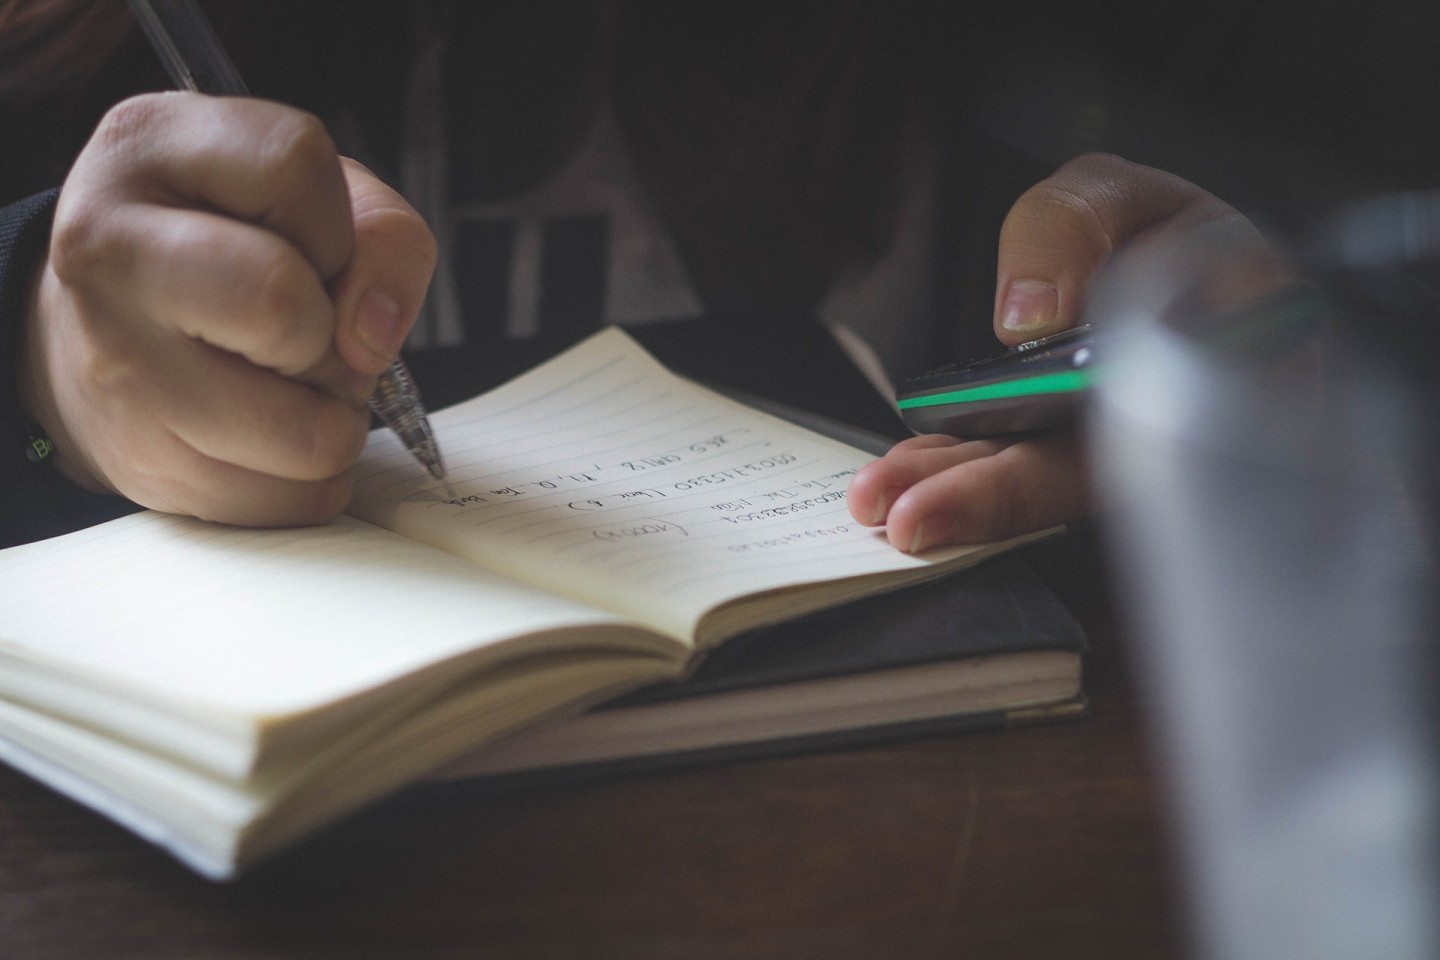 Journaling is a great way to practise mindfulness and connect with your thoughts and feelings.